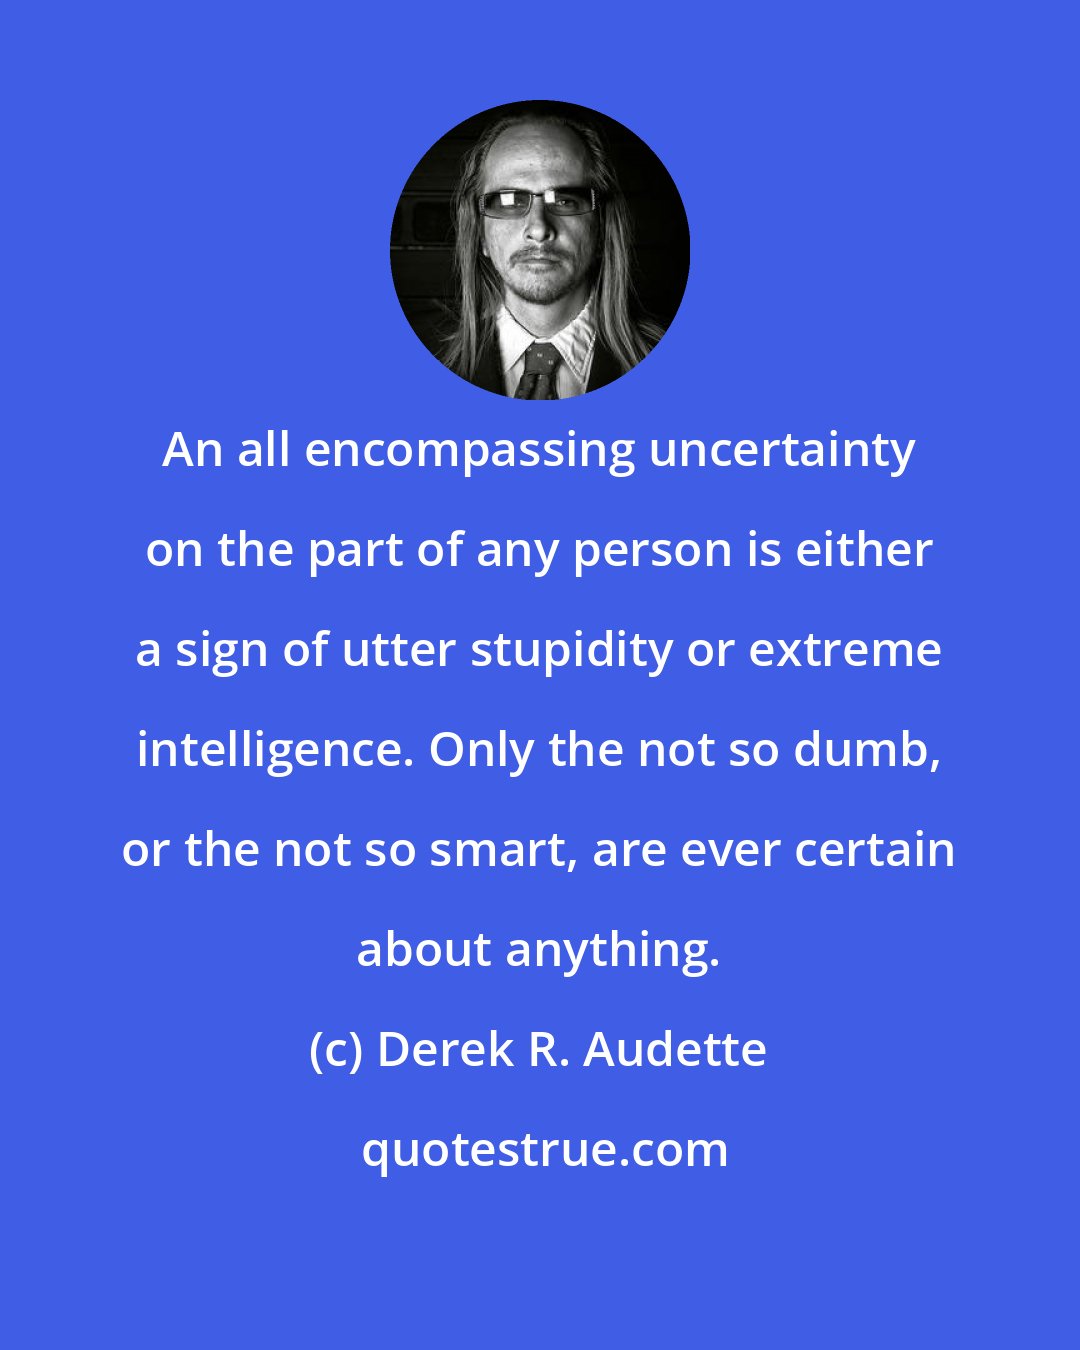 Derek R. Audette: An all encompassing uncertainty on the part of any person is either a sign of utter stupidity or extreme intelligence. Only the not so dumb, or the not so smart, are ever certain about anything.